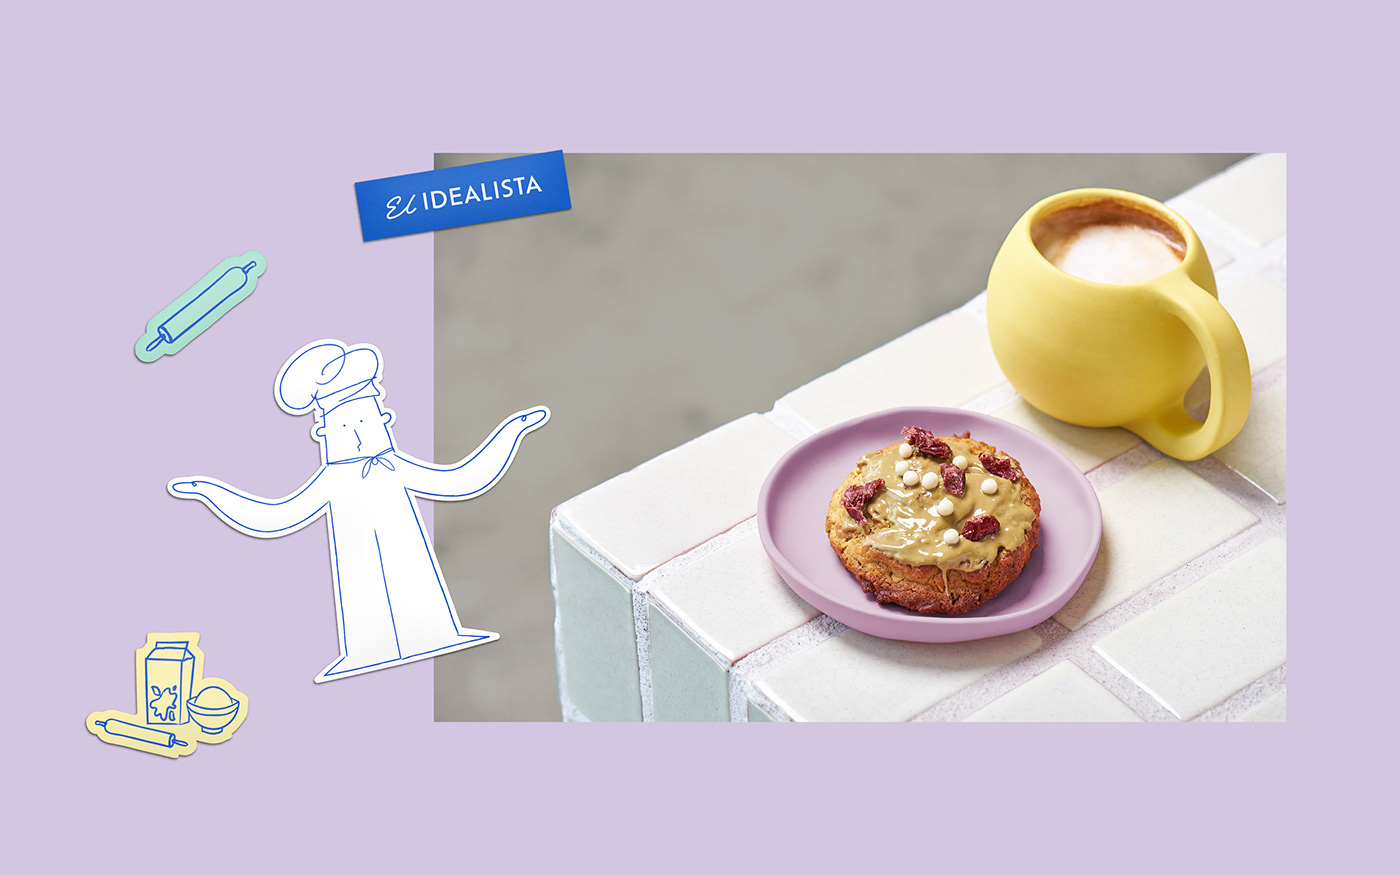 stickers and dessert with coffee on a purple background.
